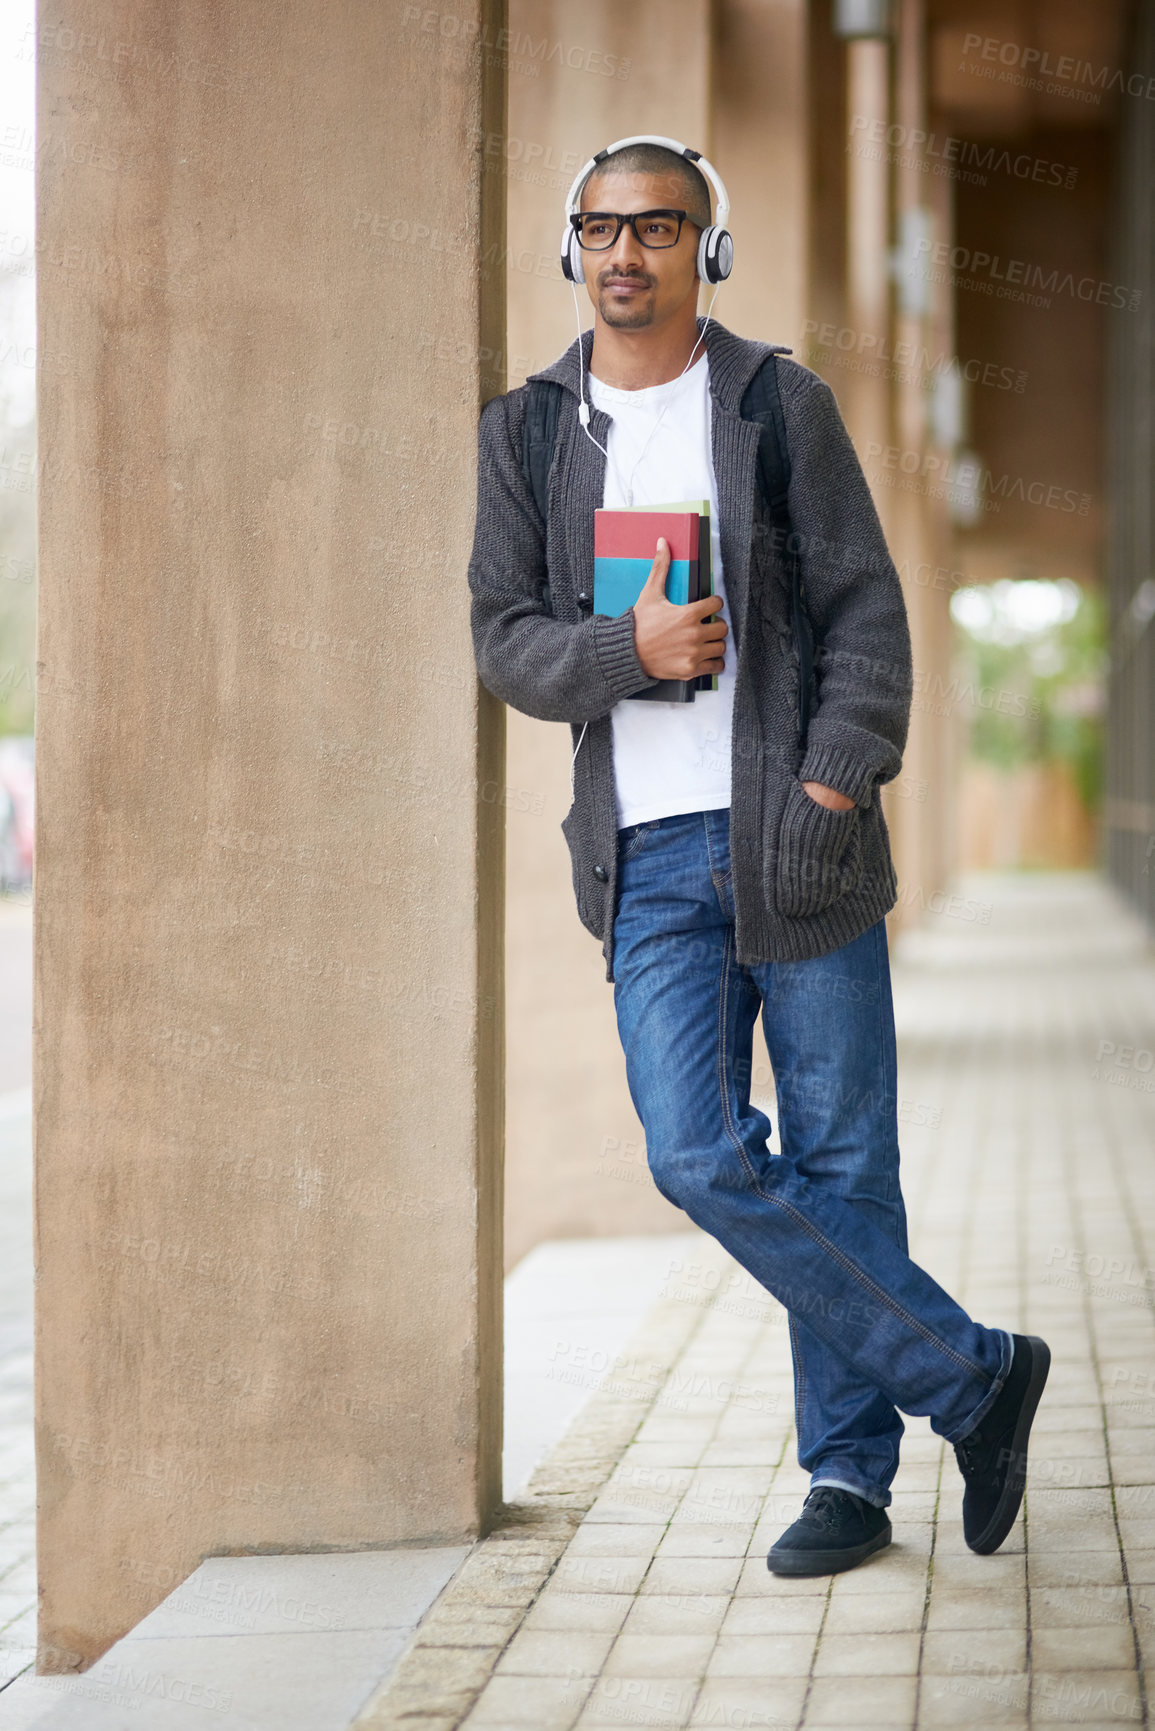 Buy stock photo Shot of a college student at campus